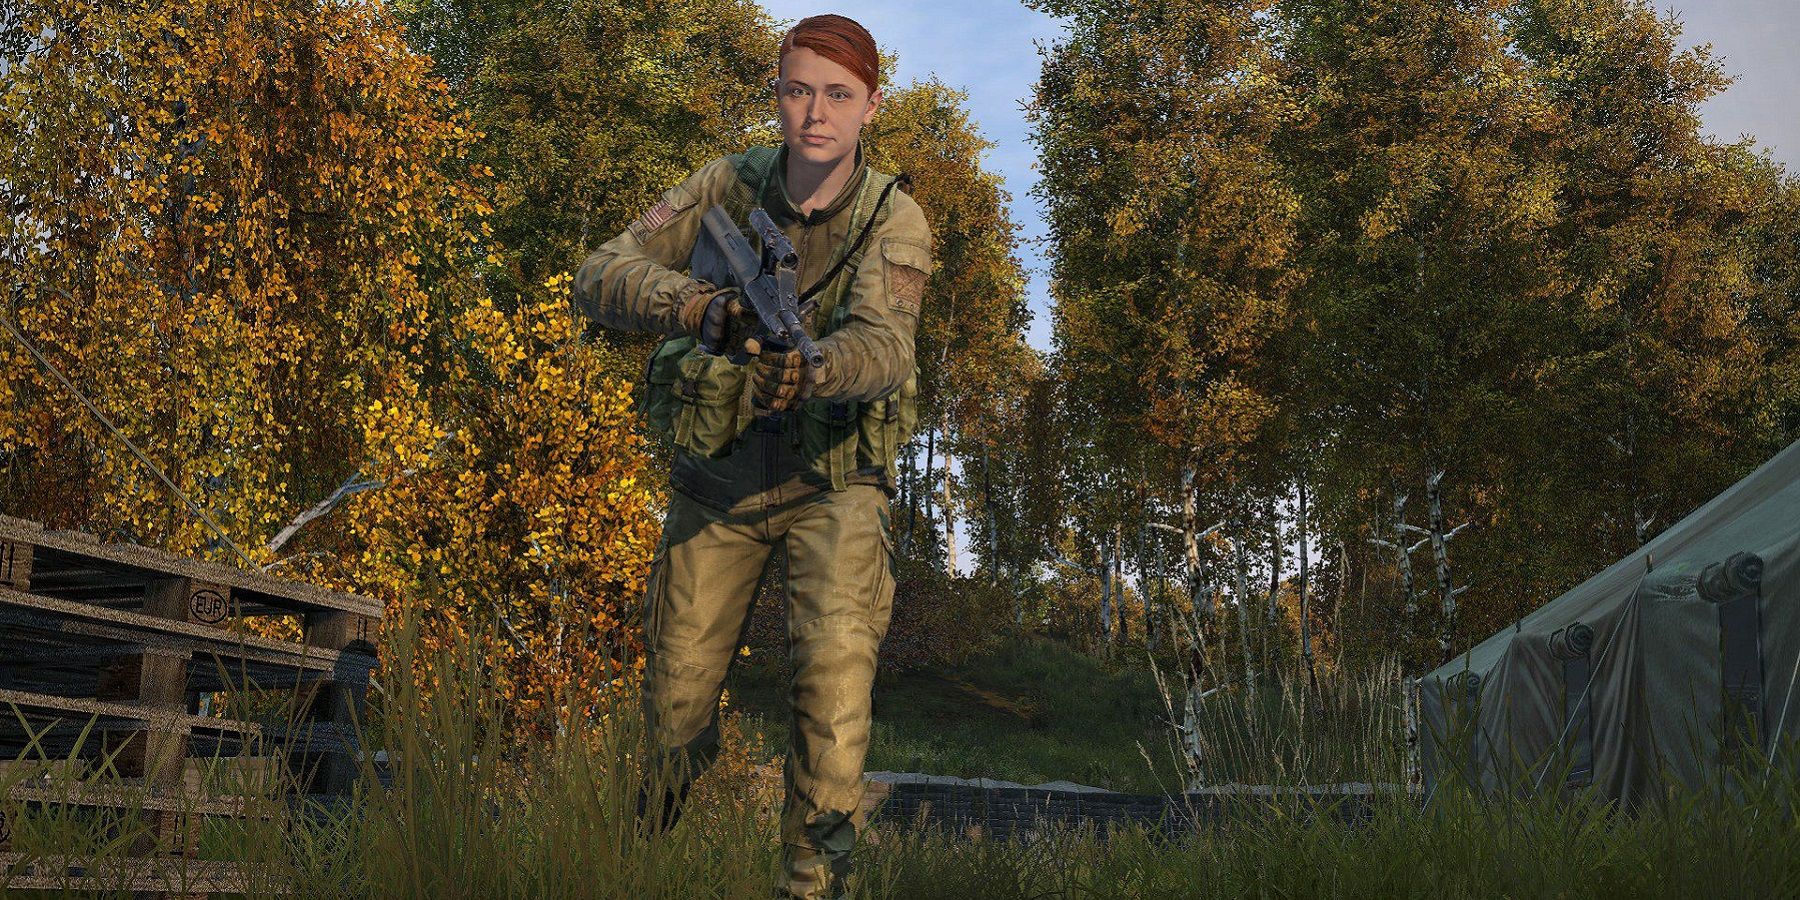 DayZ Update Adds New Weapon, New Female Character, And Tweaks Game